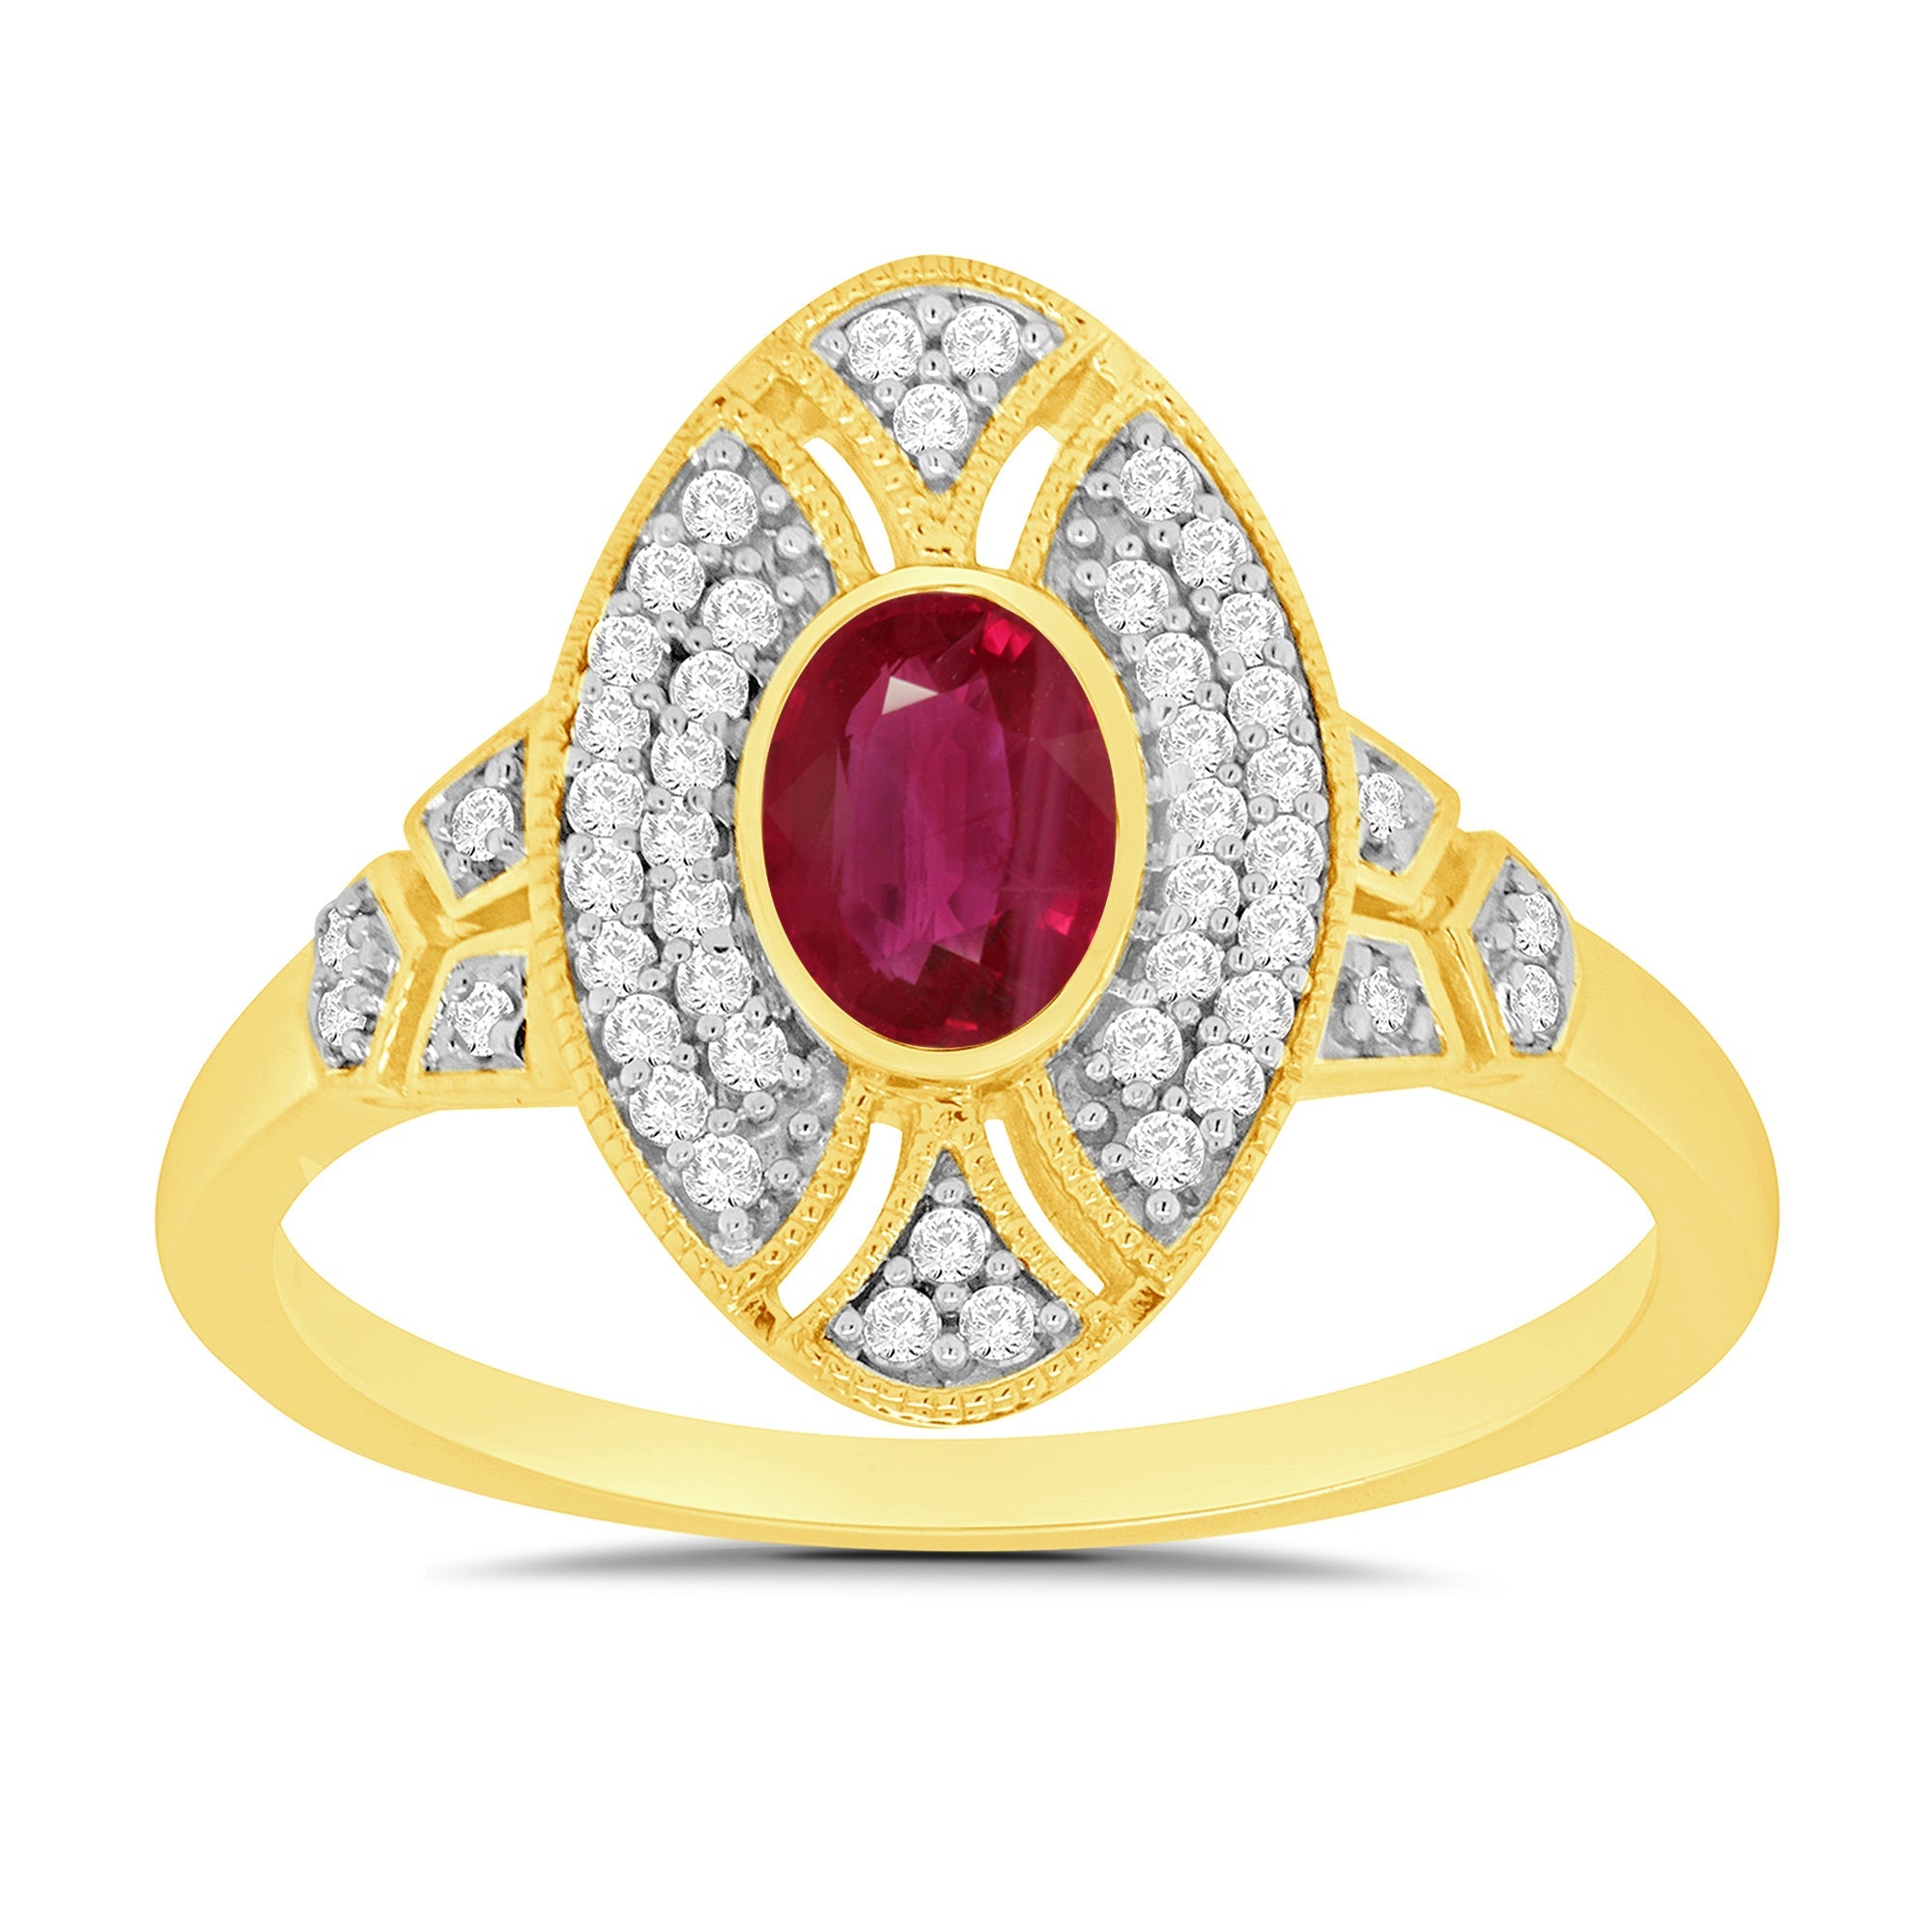 9ct gold 6x4mm oval ruby & antique style diamond cluster ring 0.18ct